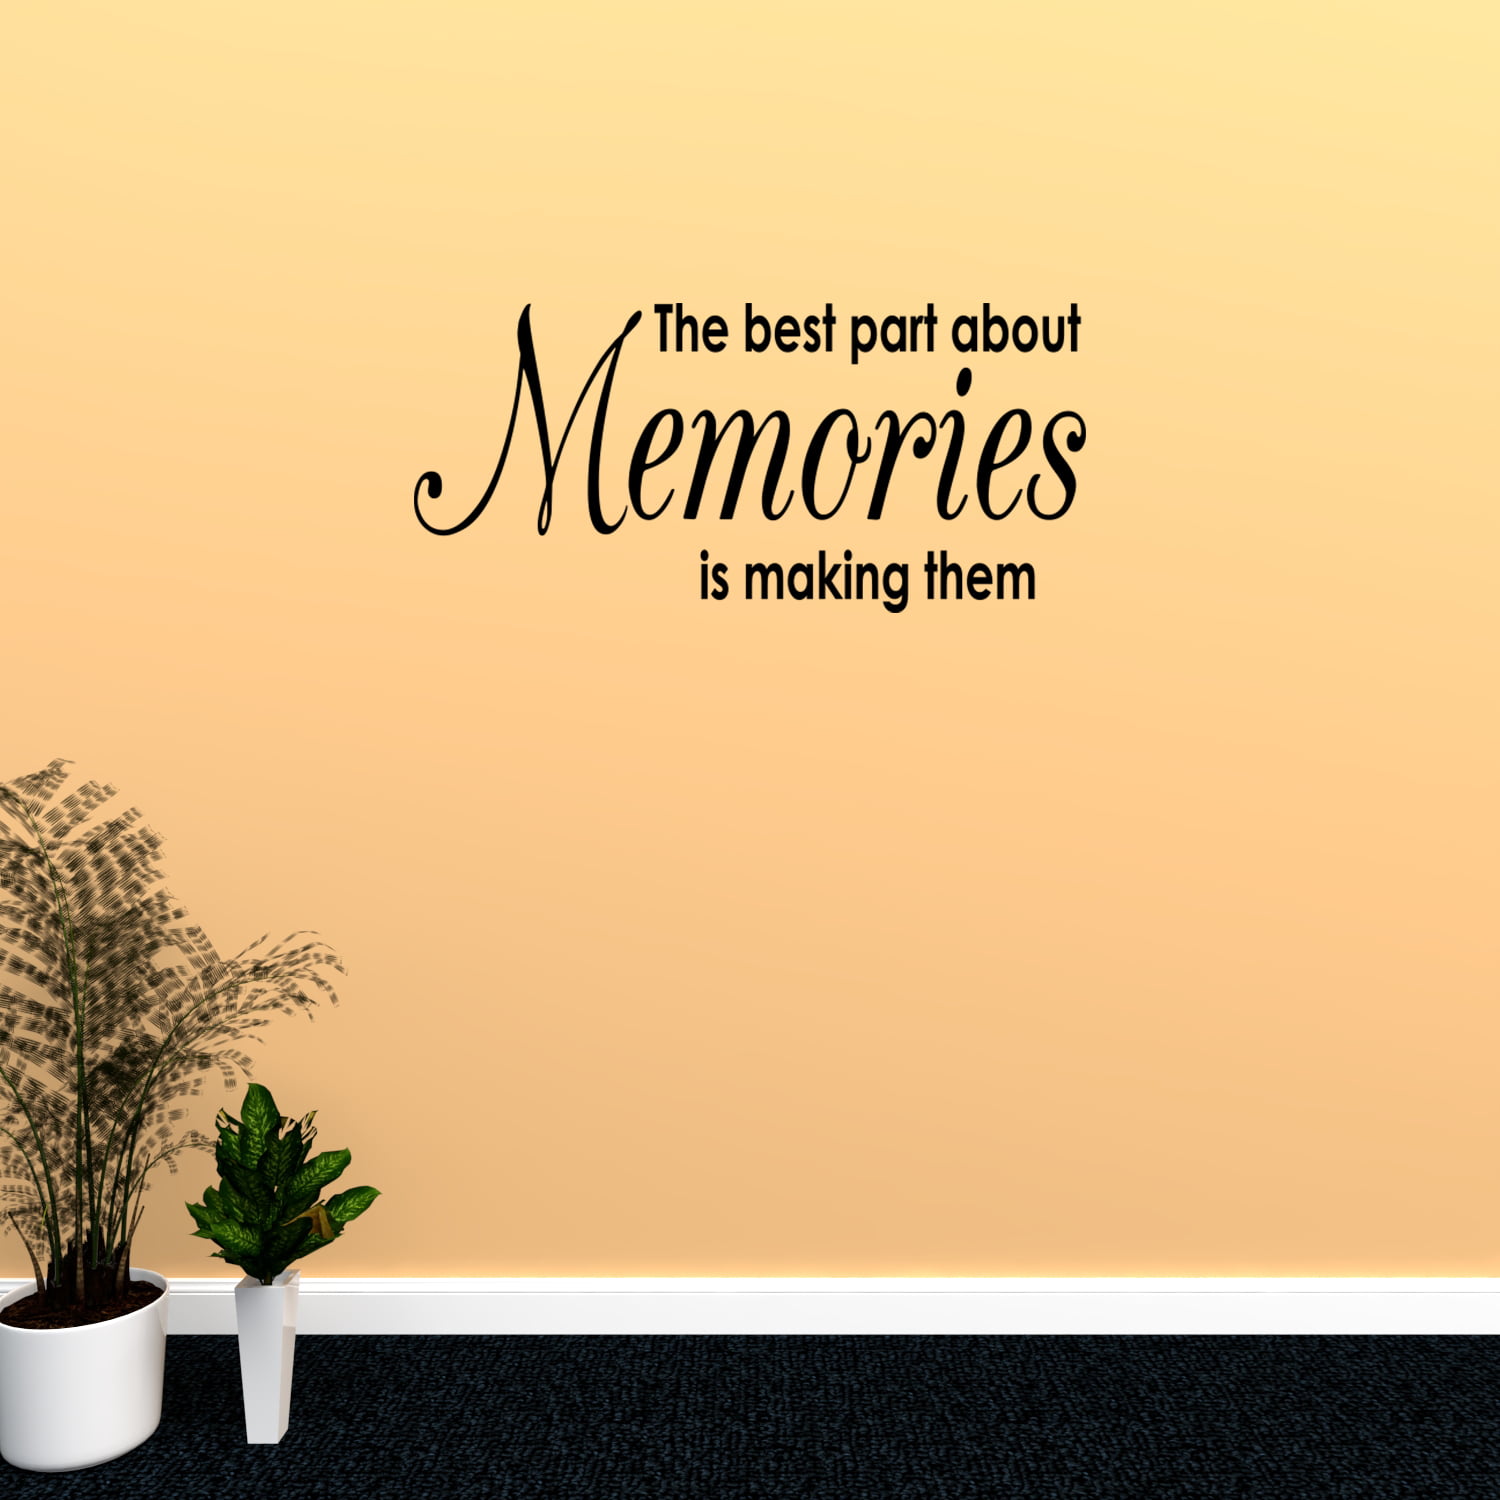 The fondest memories are made Vinyl Wall Art Words Decals Stickers Decor Custom 